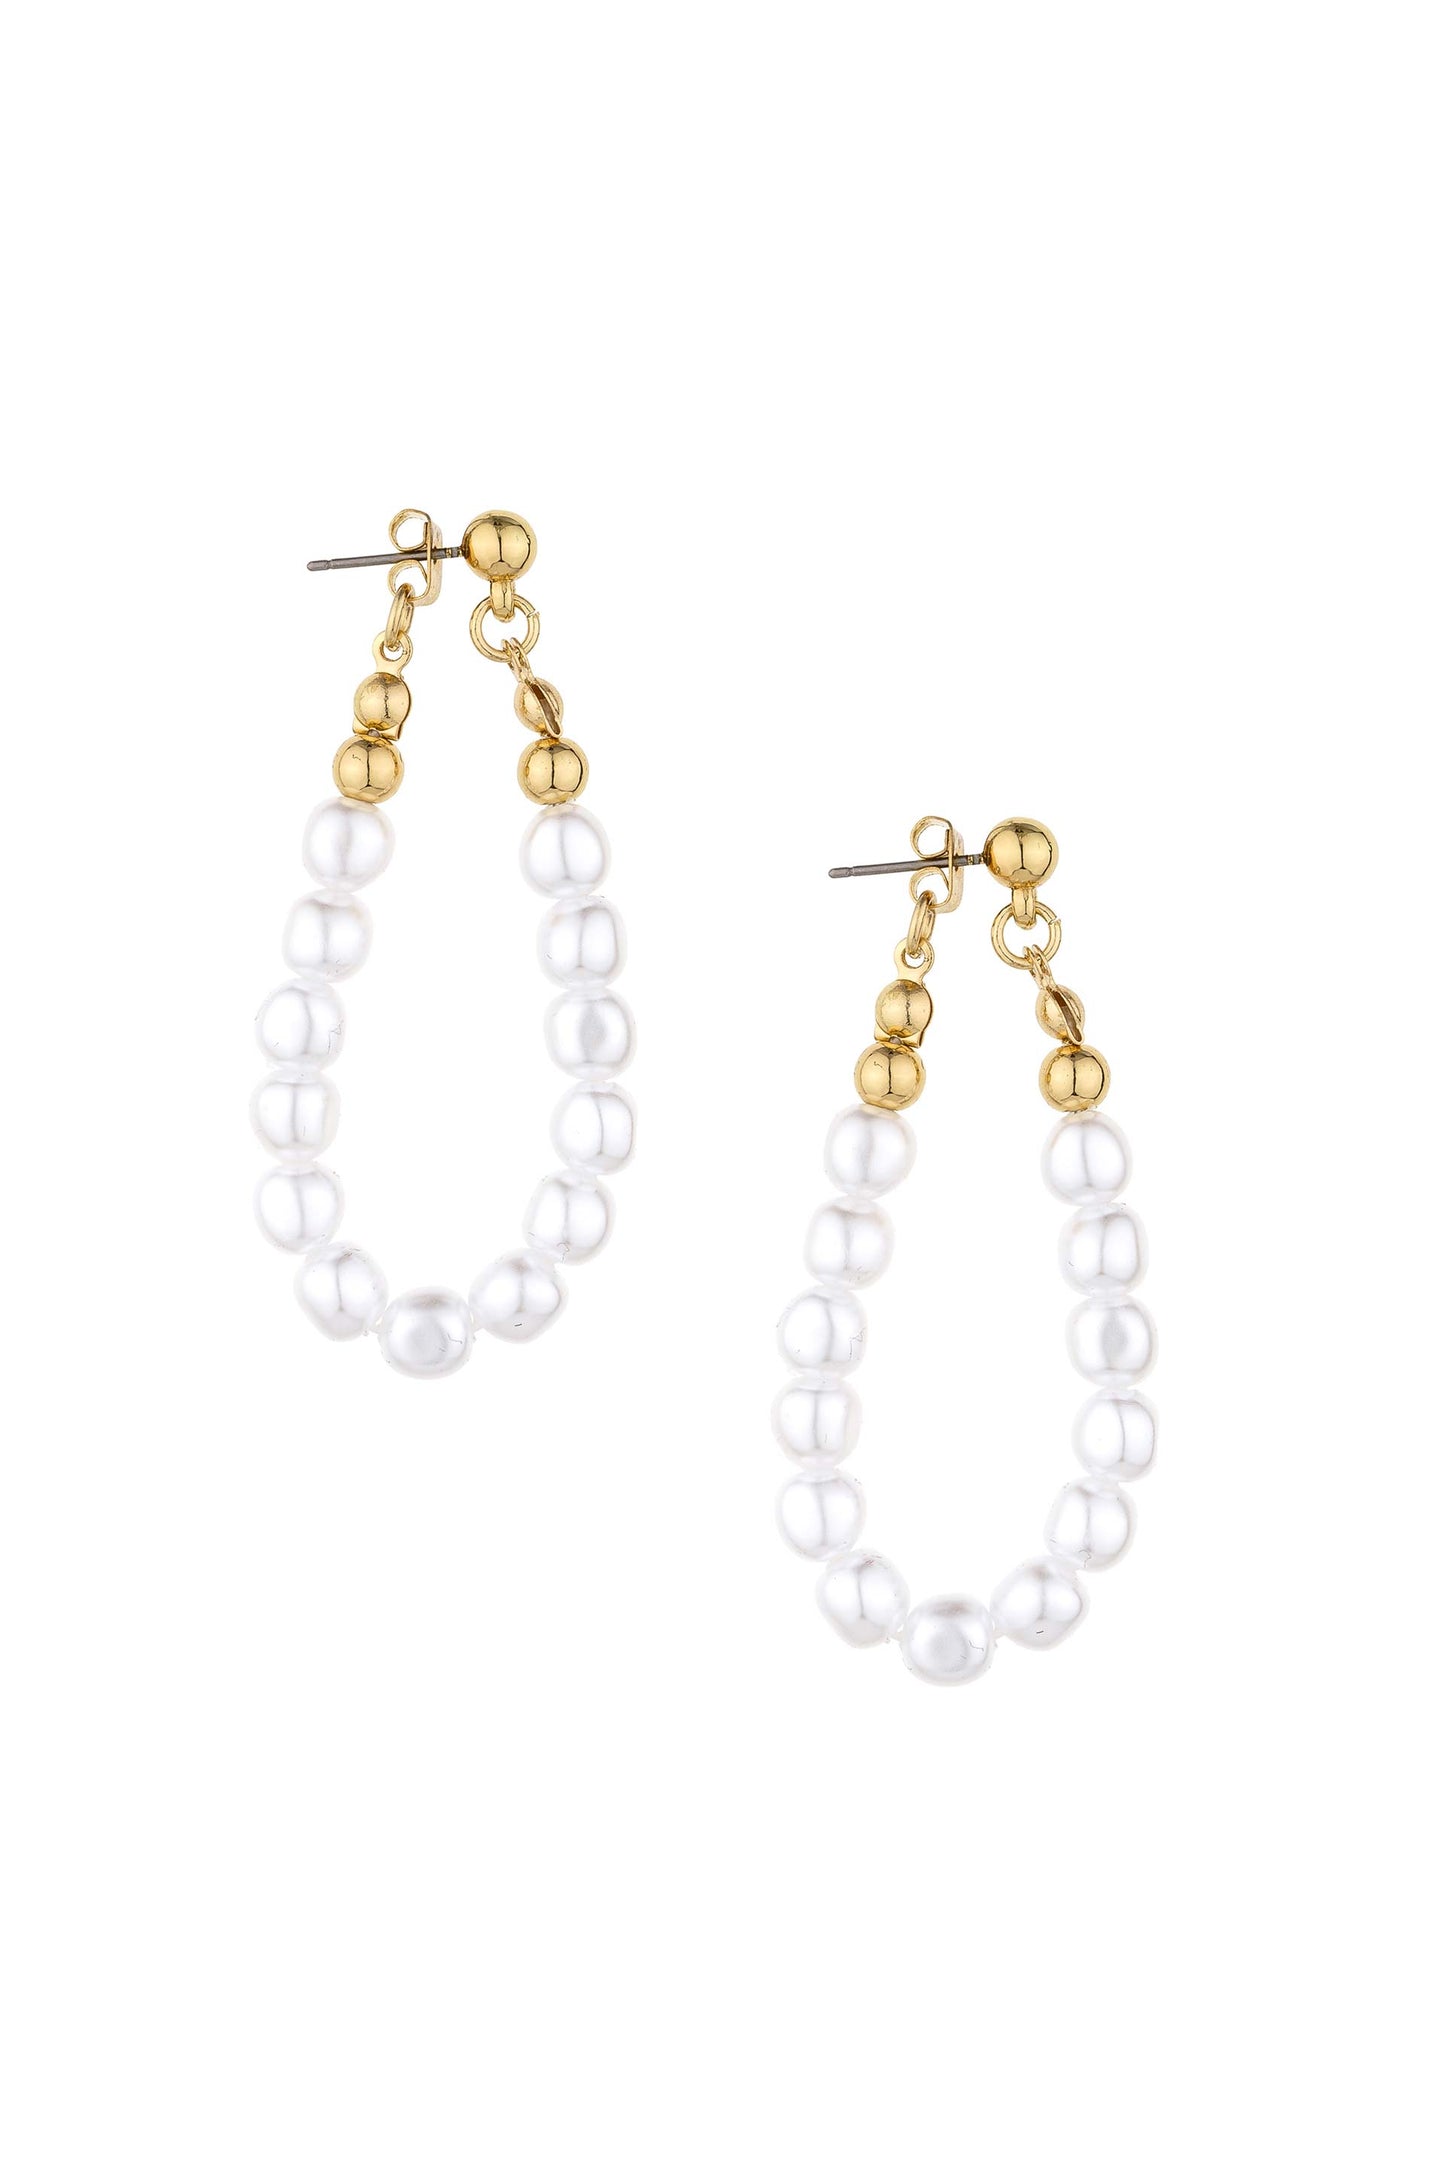 Pearl and 18k Gold Plated Ball Chain Drop Earrings on white